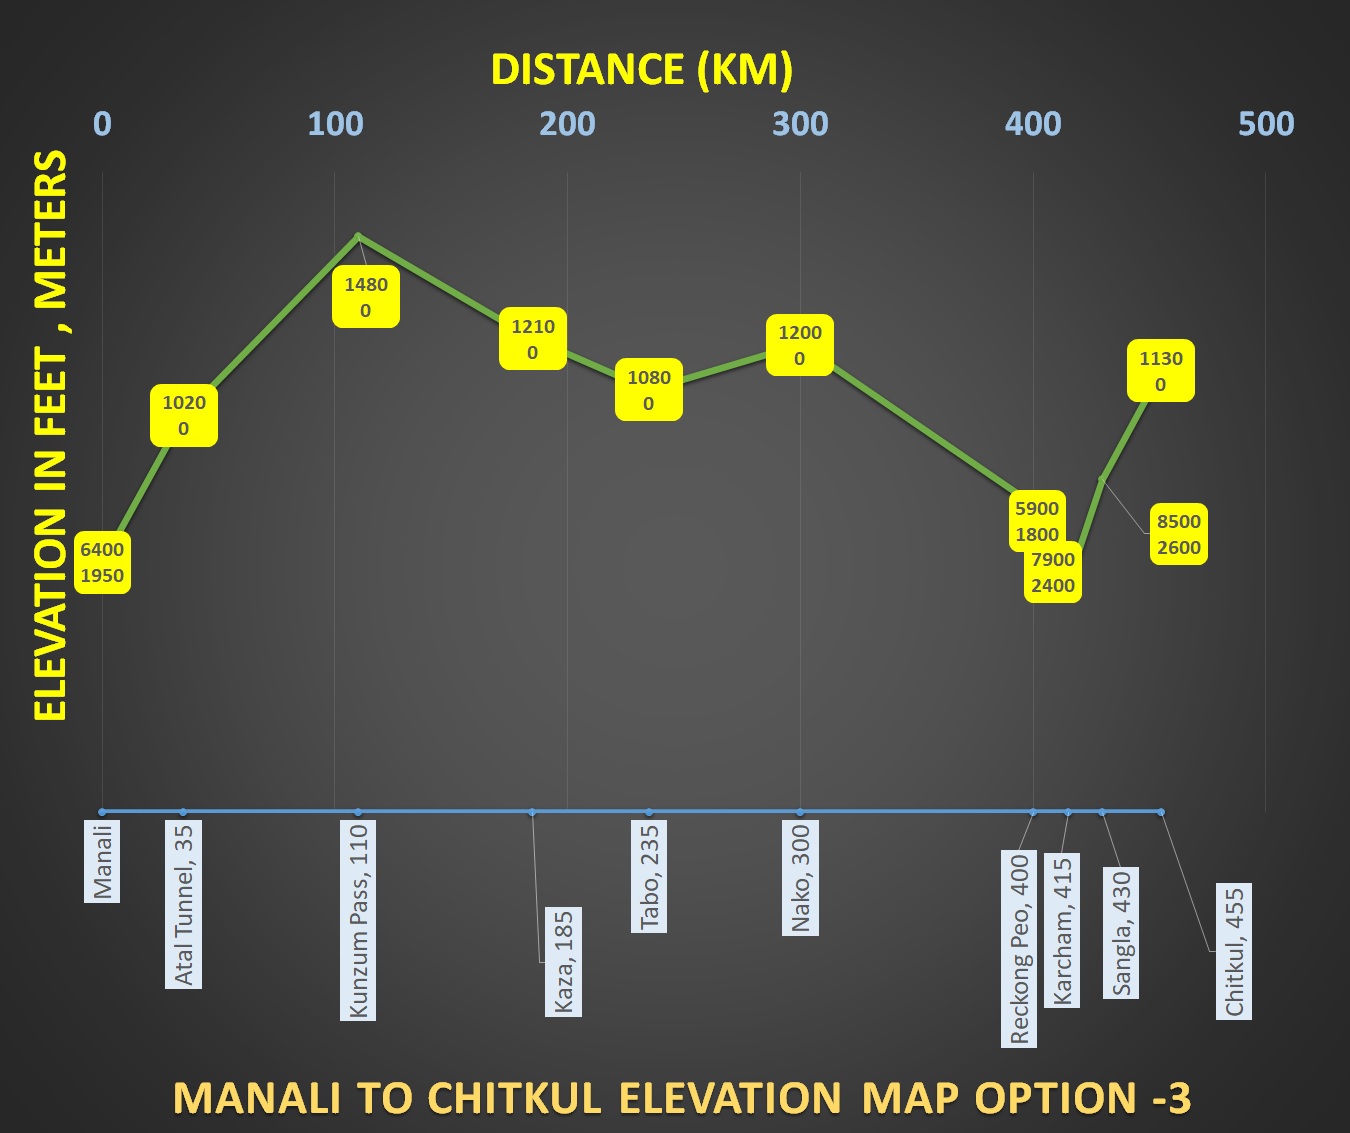 How to reach Chitkul from Manali by Road